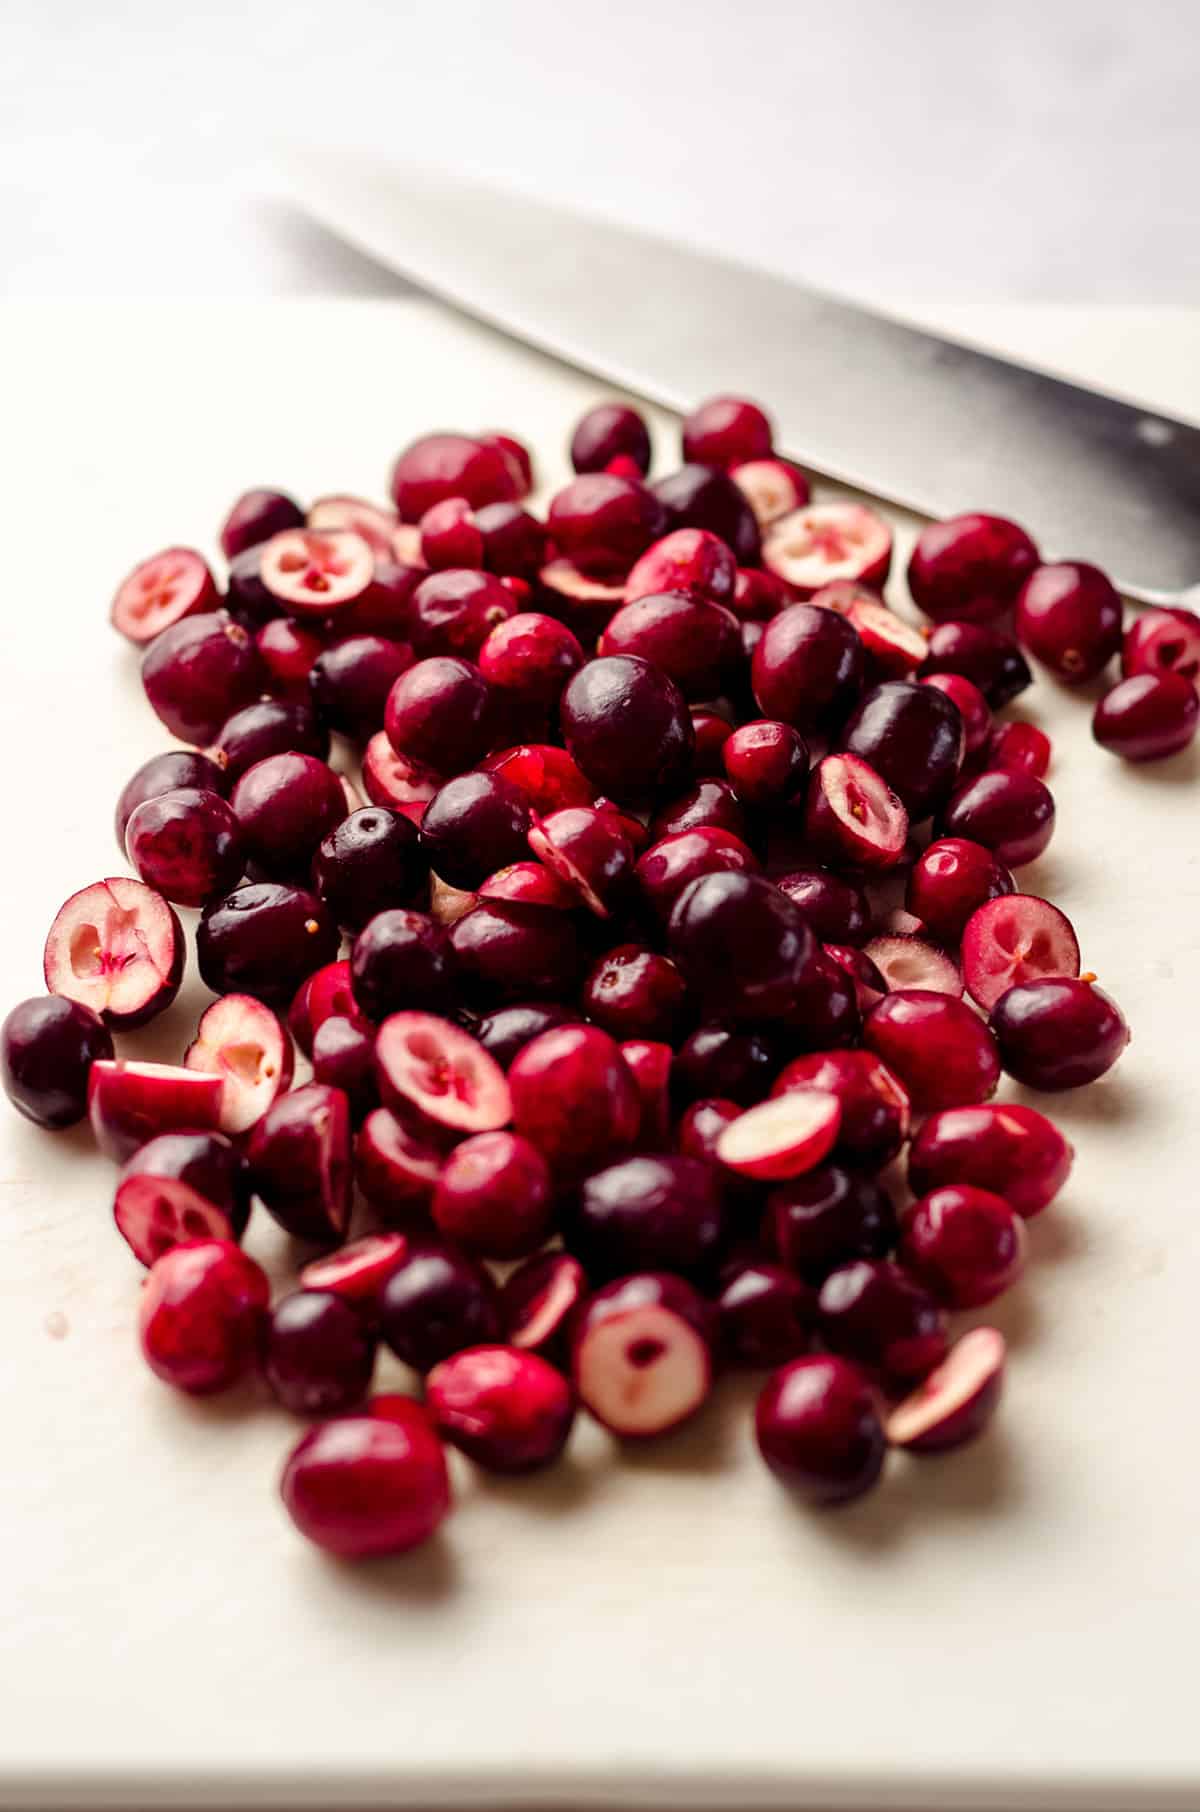 coarsely chopped cranberries